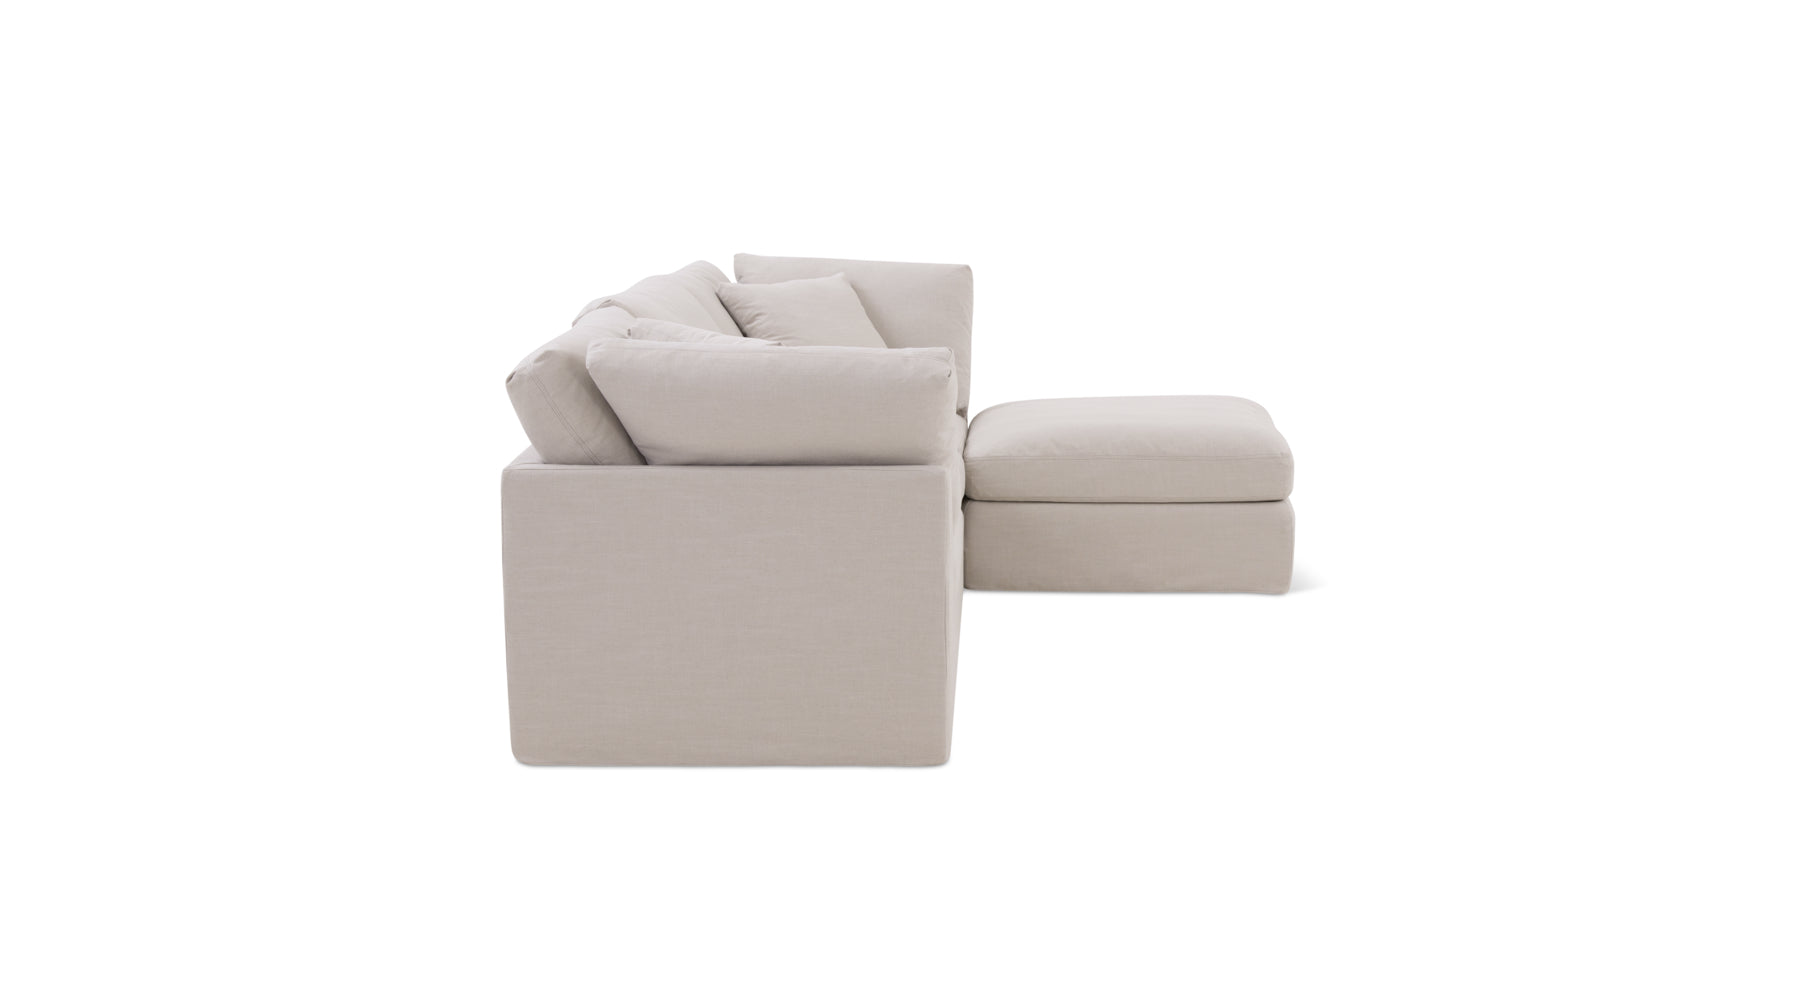 Get Together™ 4-Piece Modular Sectional, Standard, Clay - Image 6